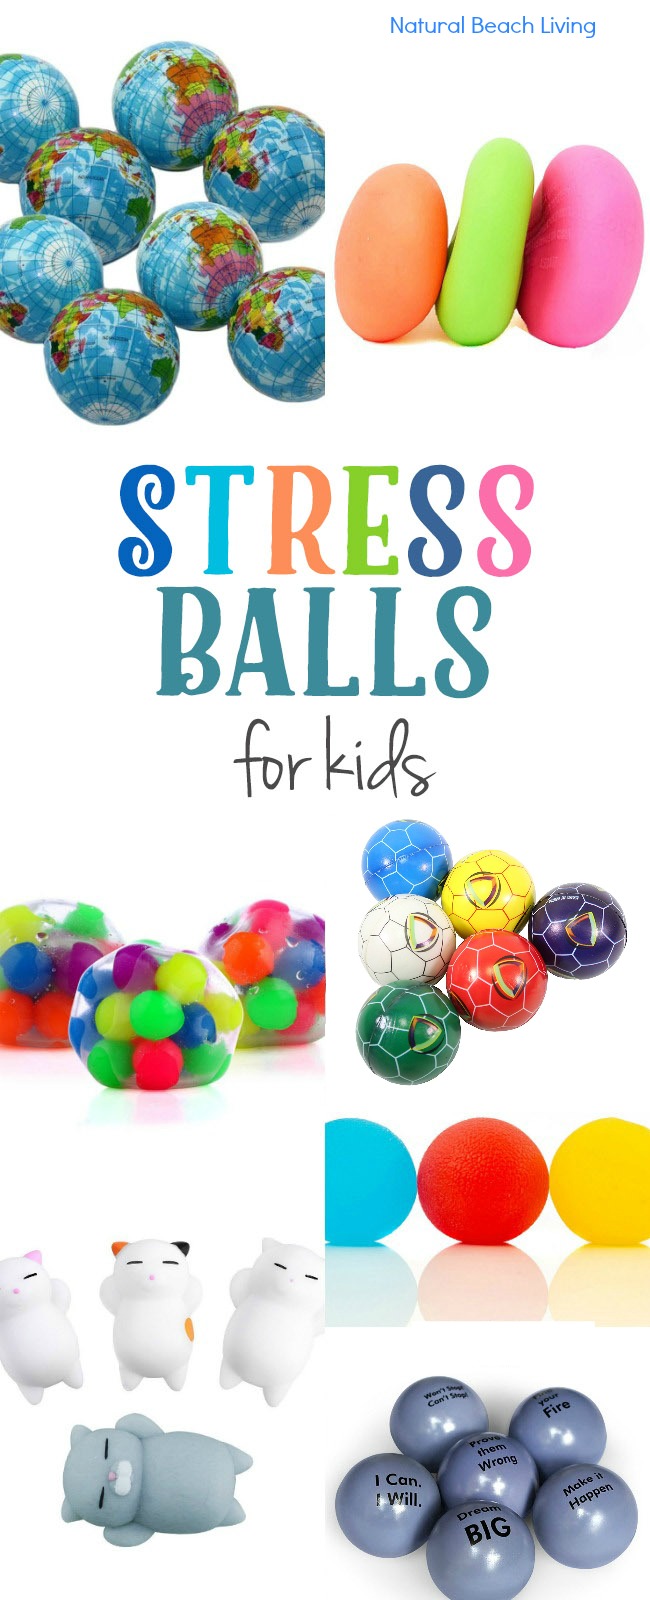 The Best Stress Balls for Kids, DIY Stress Balls, Best Stress Balls, Kids Stress Balls, Stress Ball Benefits, Fidget Toys, Easy to make sensory balls. Simple squishy stress ball stress relief, help with Fidgeting, sensory balls for calming and to promote focus and concentration, decrease stress and increase tactile awareness. They are great for Autism, ADD, ADHD, and anxiety. Stress balls can be so much fun. Squeeze them, bounce them, toss them, squish them, and poke them until you feel better. #stressballs #DIYstressrelievers #stressrelief #parenting #Autism #anxiouskids